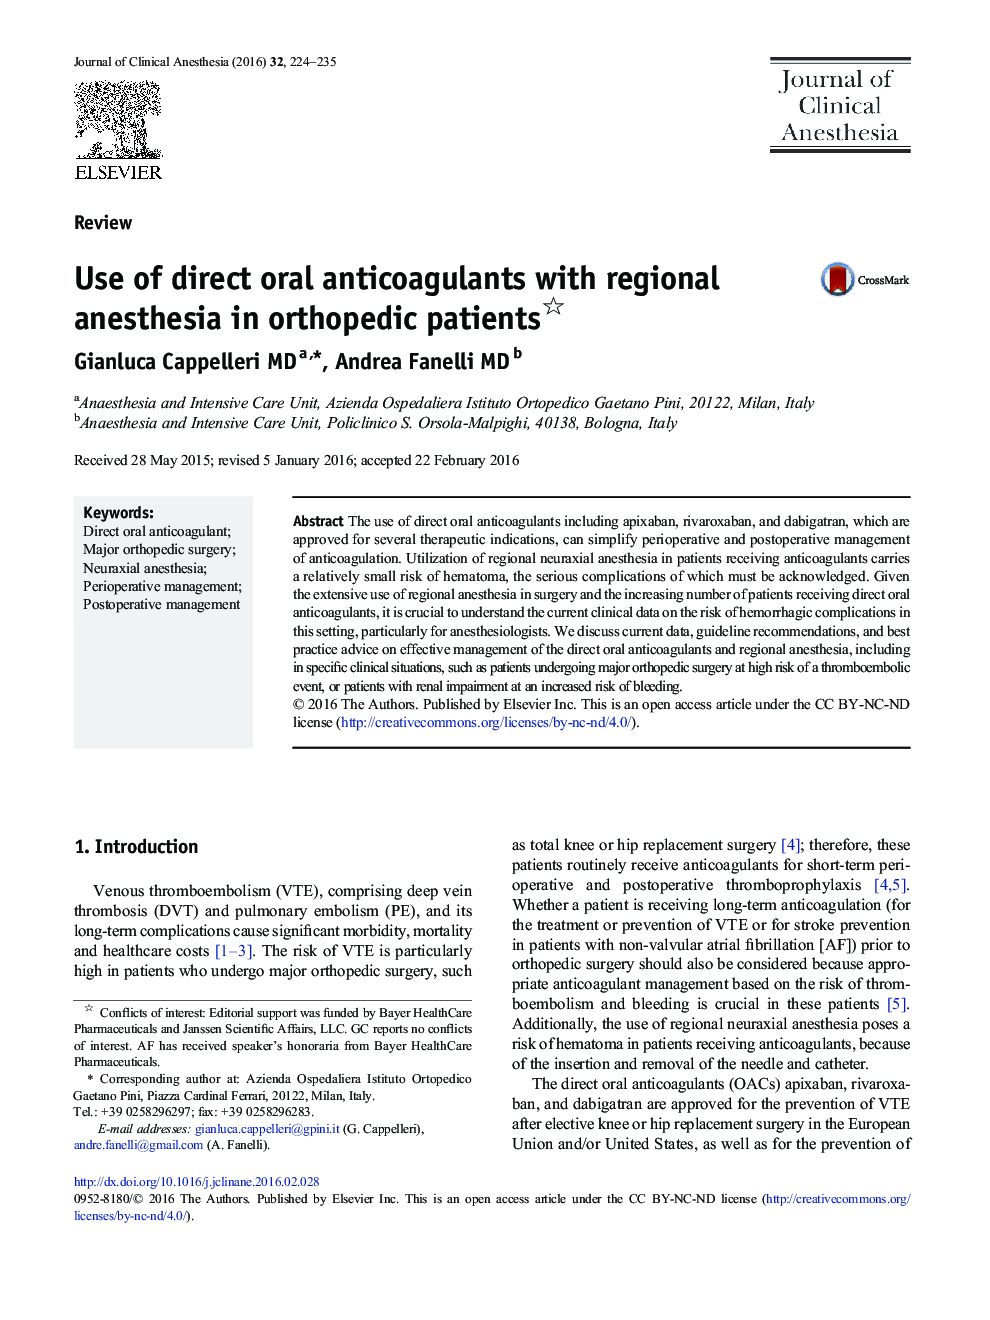 ReviewUse of direct oral anticoagulants with regional anesthesia in orthopedic patients